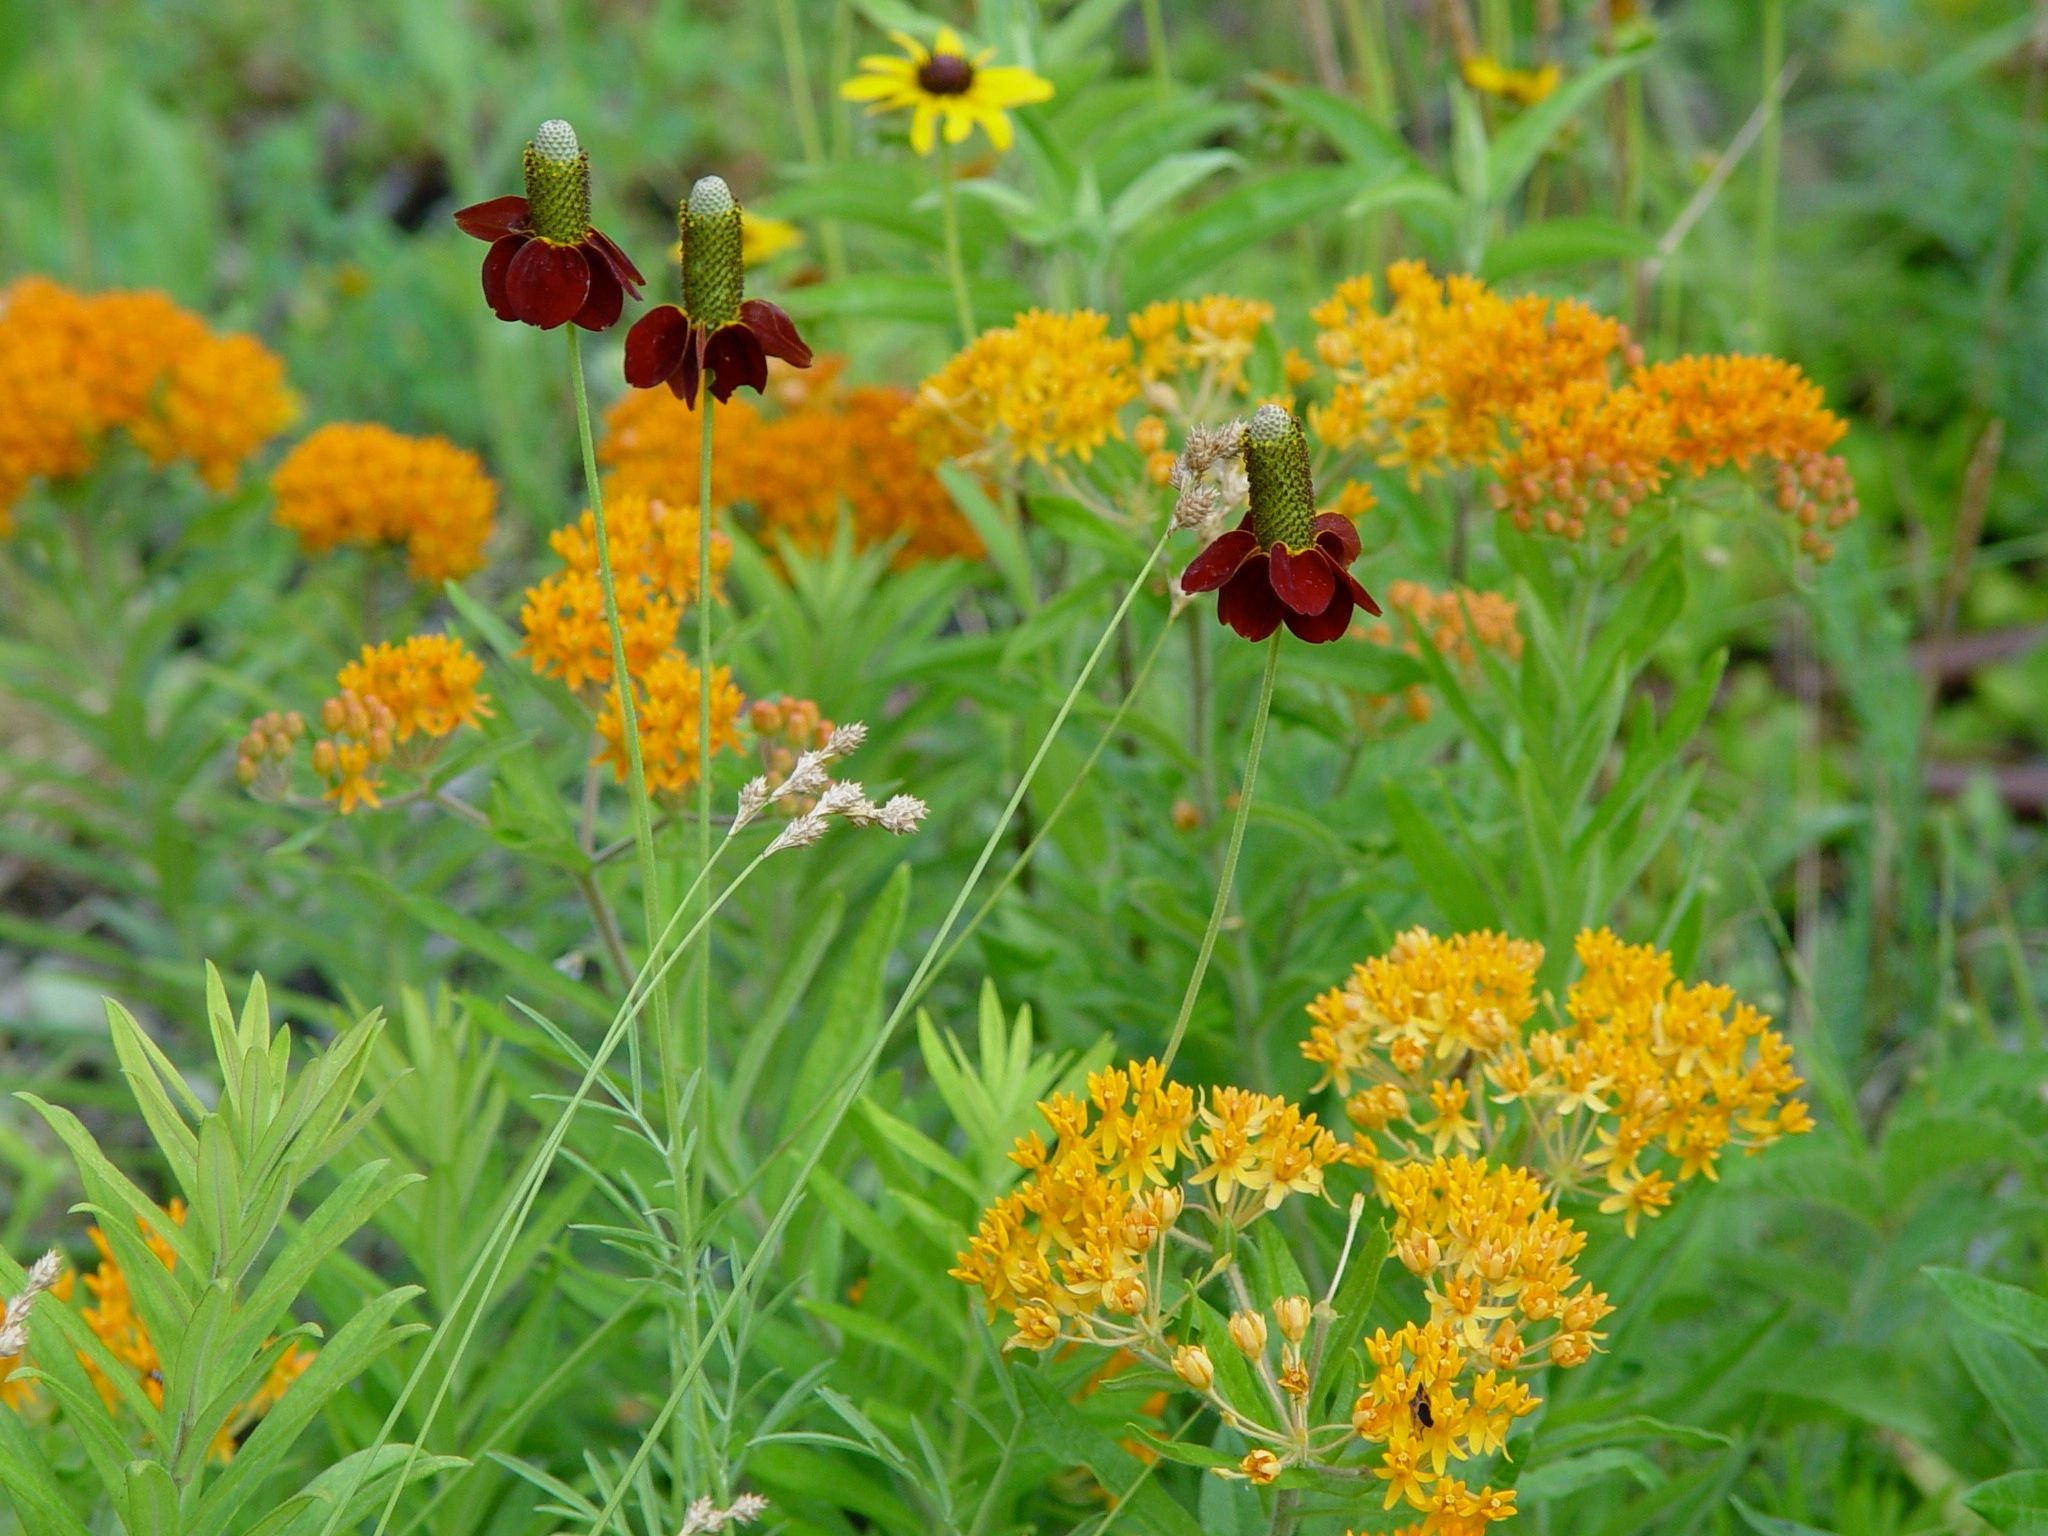 Native Plants
Diversity
Regionally appropriate
Butterfly
Mexican Hat
Perennial
Environmental design